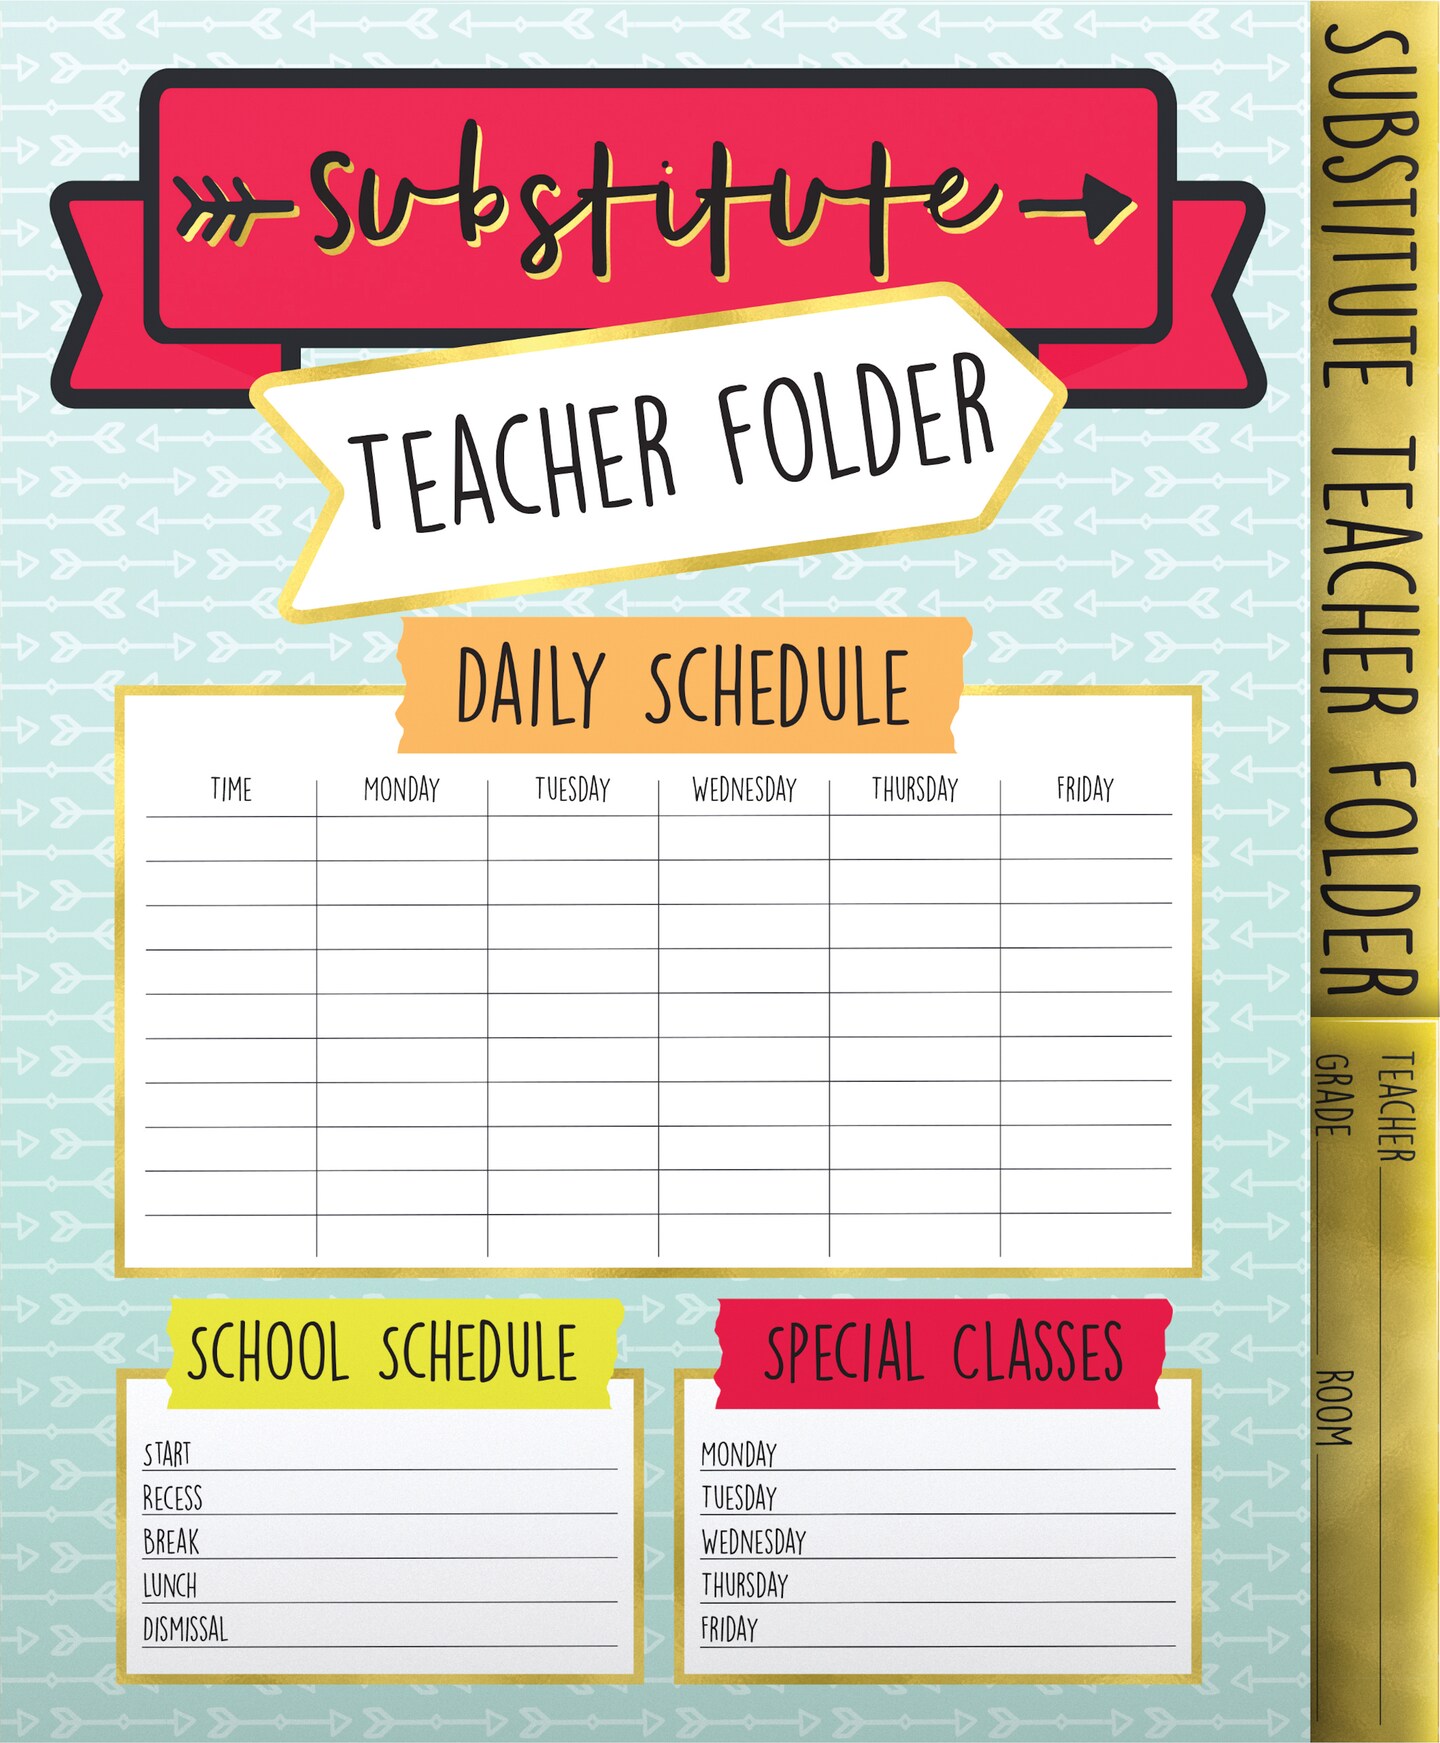 Carson Dellosa Substitute Folder for Elementary School Teacher with Daily Class Schedule, Includes Info Pocket from Teacher, Classroom Routines and Managament Sections, and Dismissal Times Chart